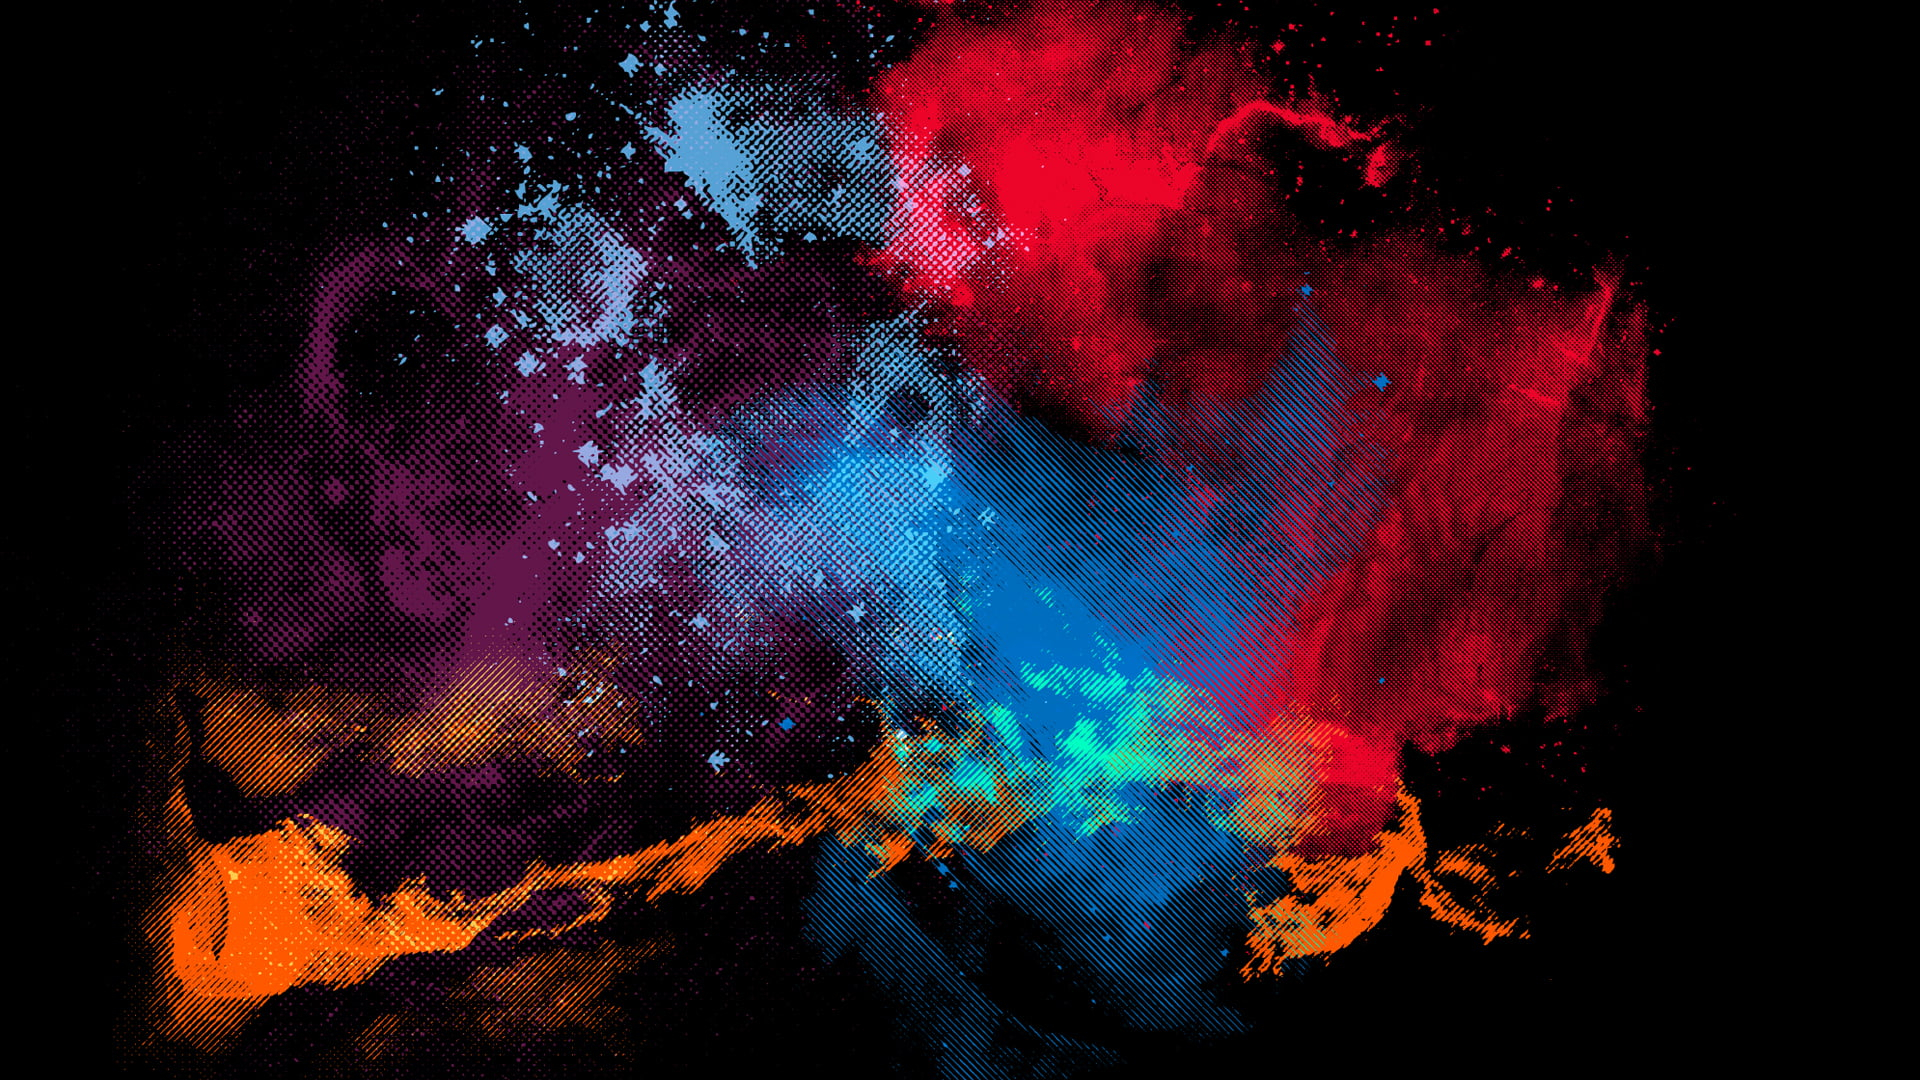 Multicolored abstract wallpaper, digital art, black background